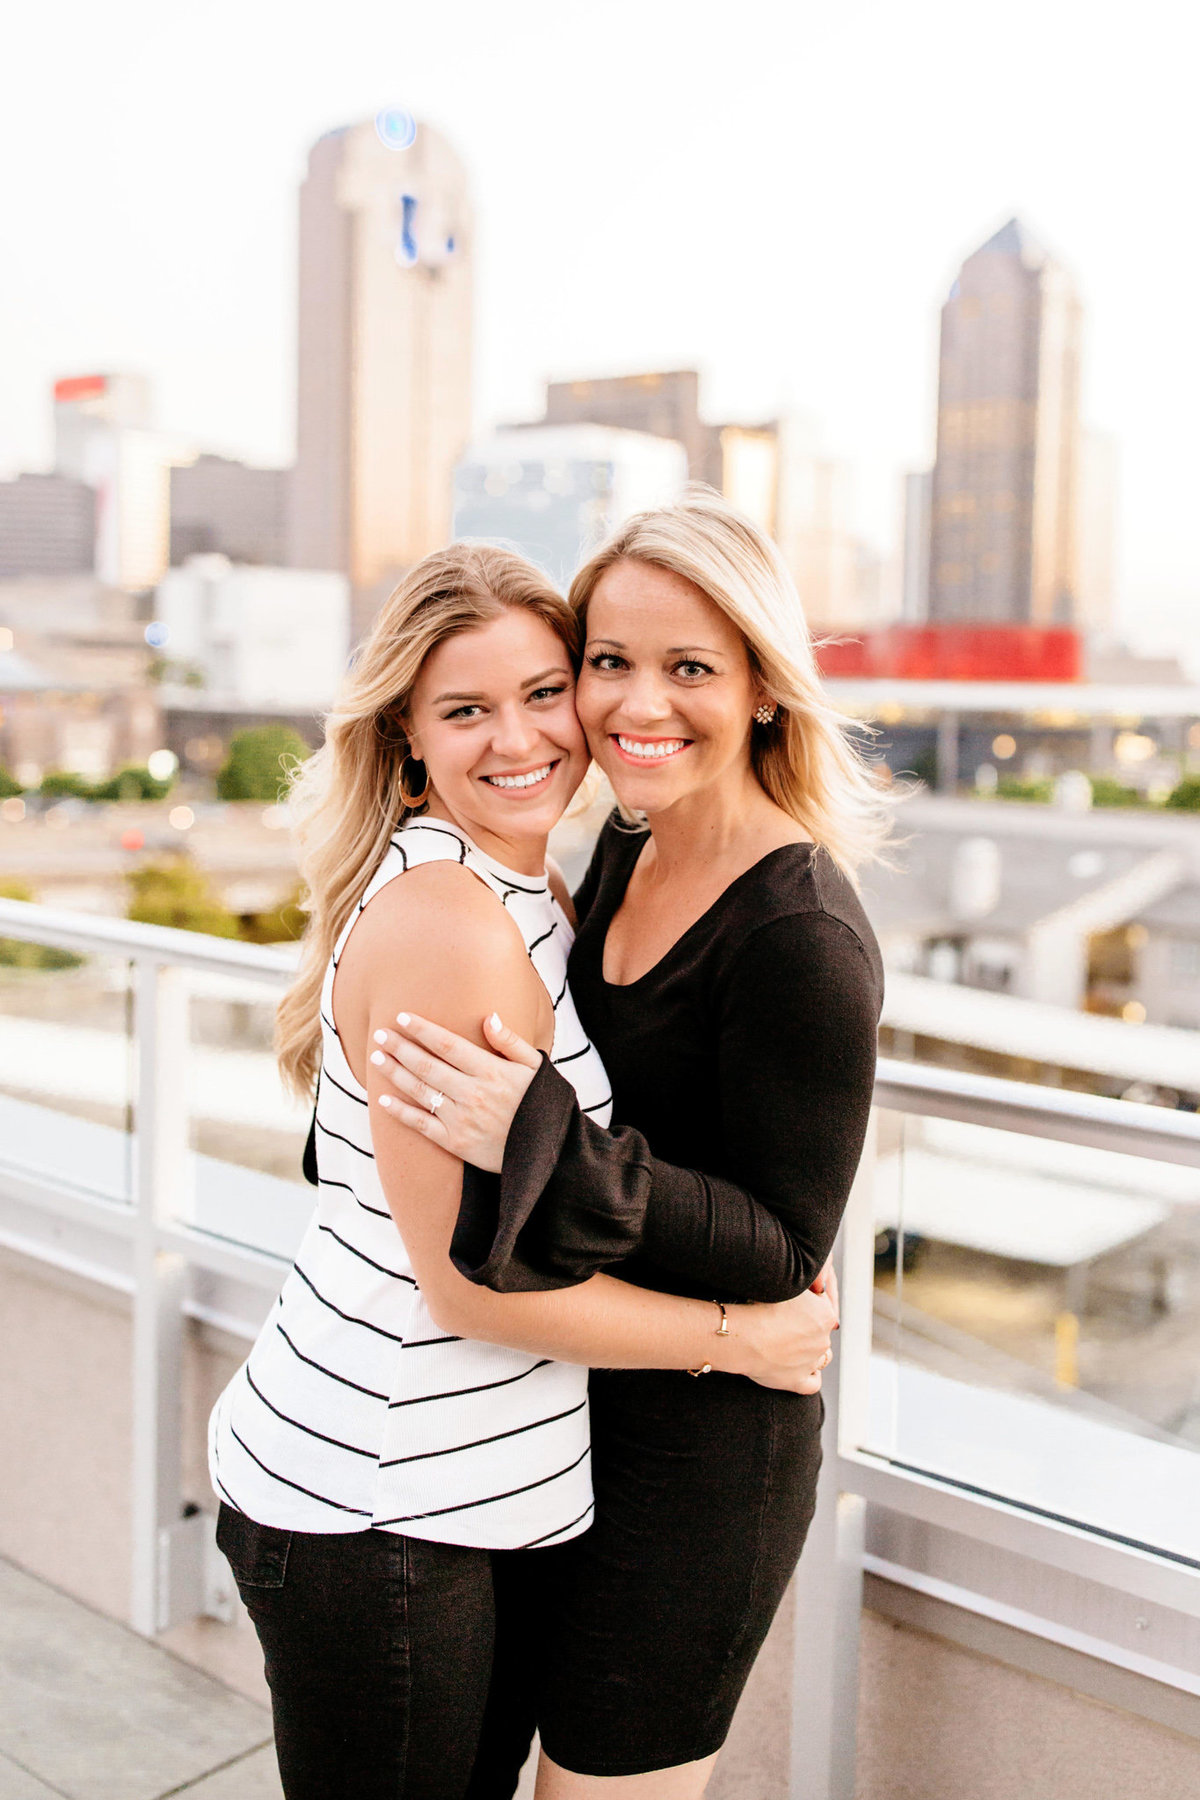 Eric & Megan - Downtown Dallas Rooftop Proposal & Engagement Session-240